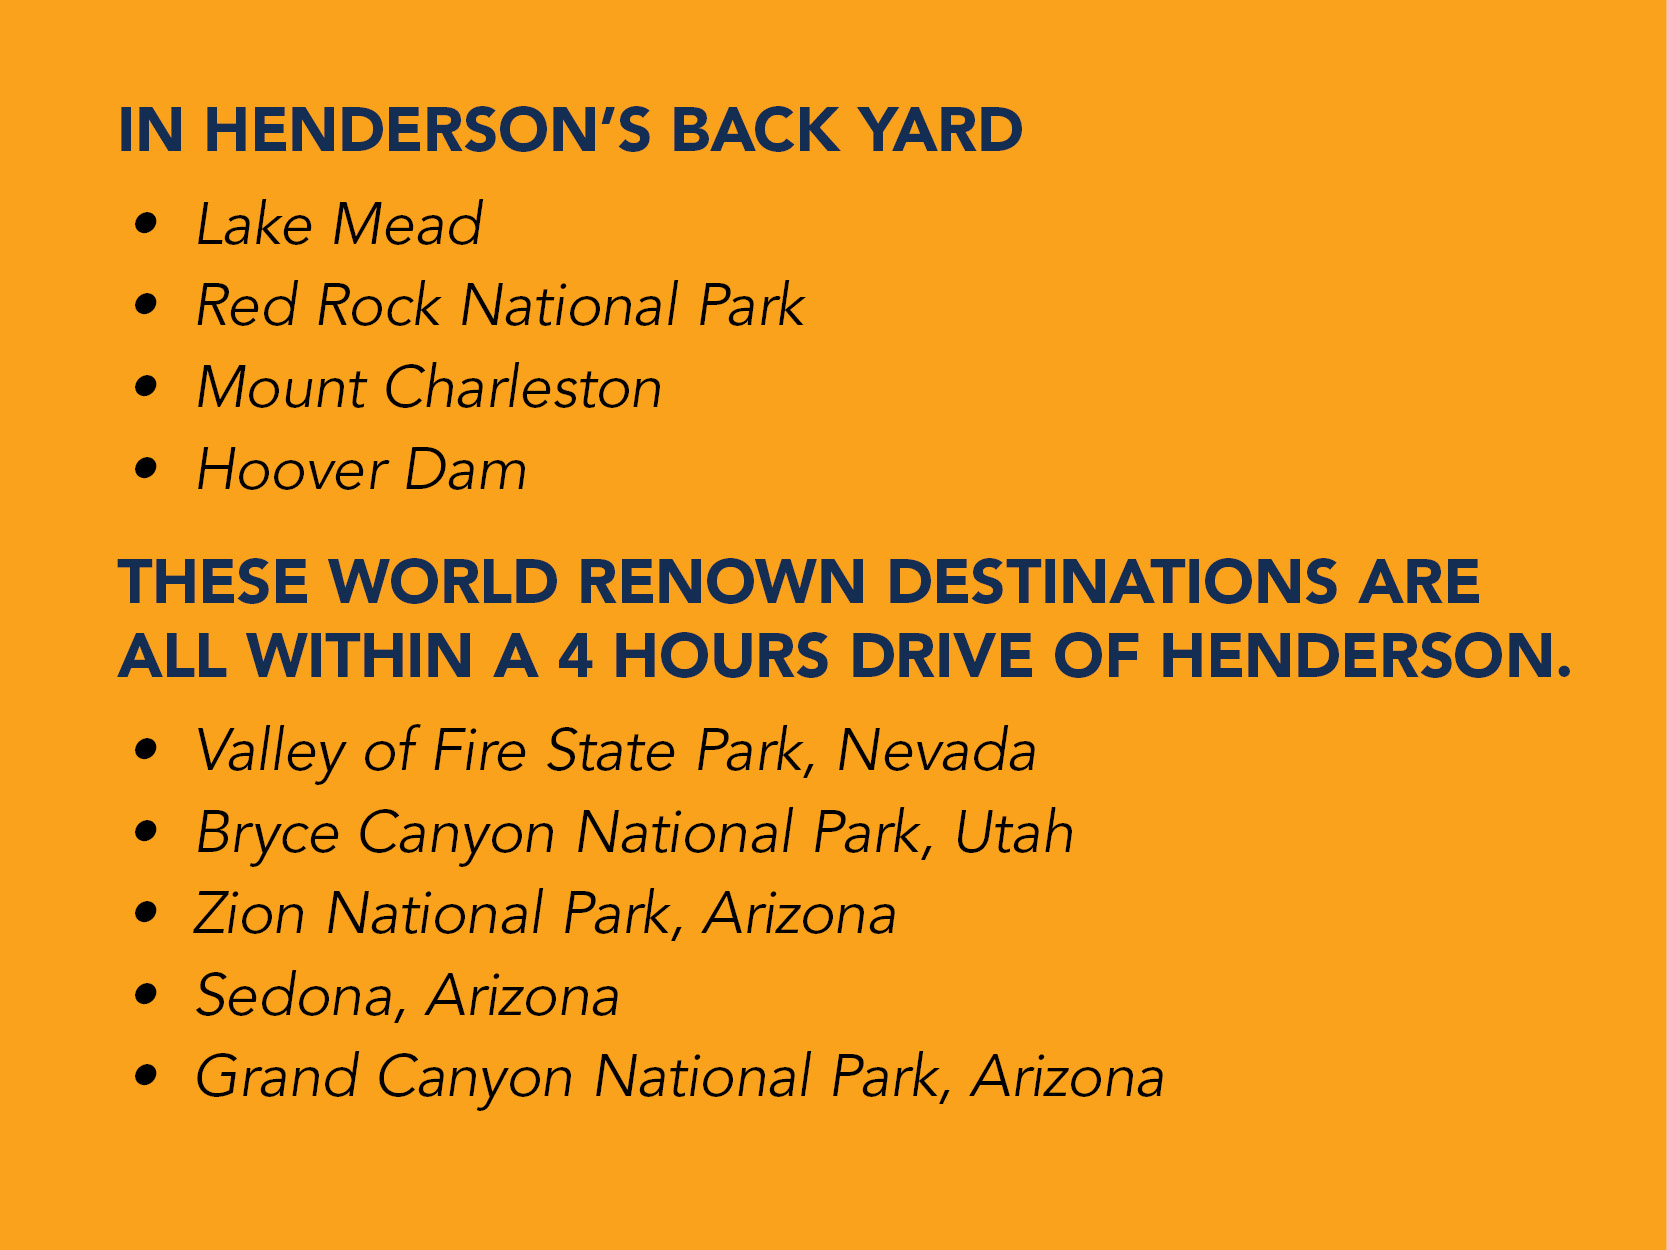 List of attractions and proximity to Henderson